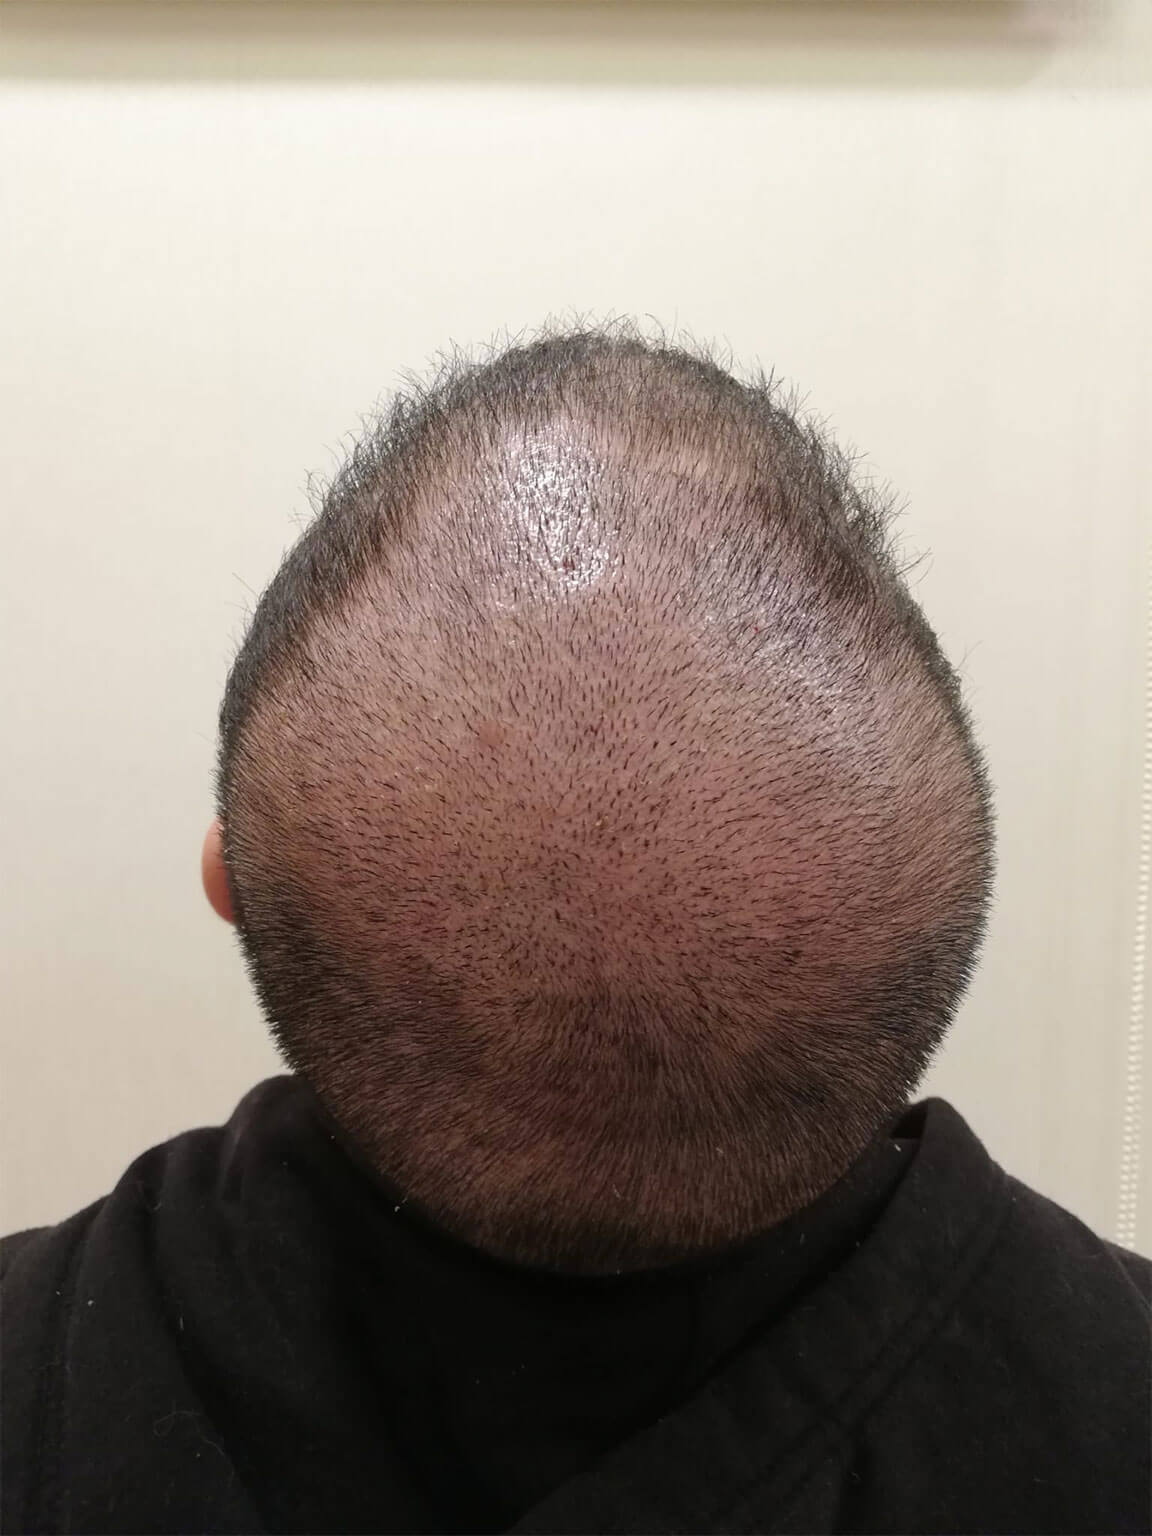 Right after crown hair transplant